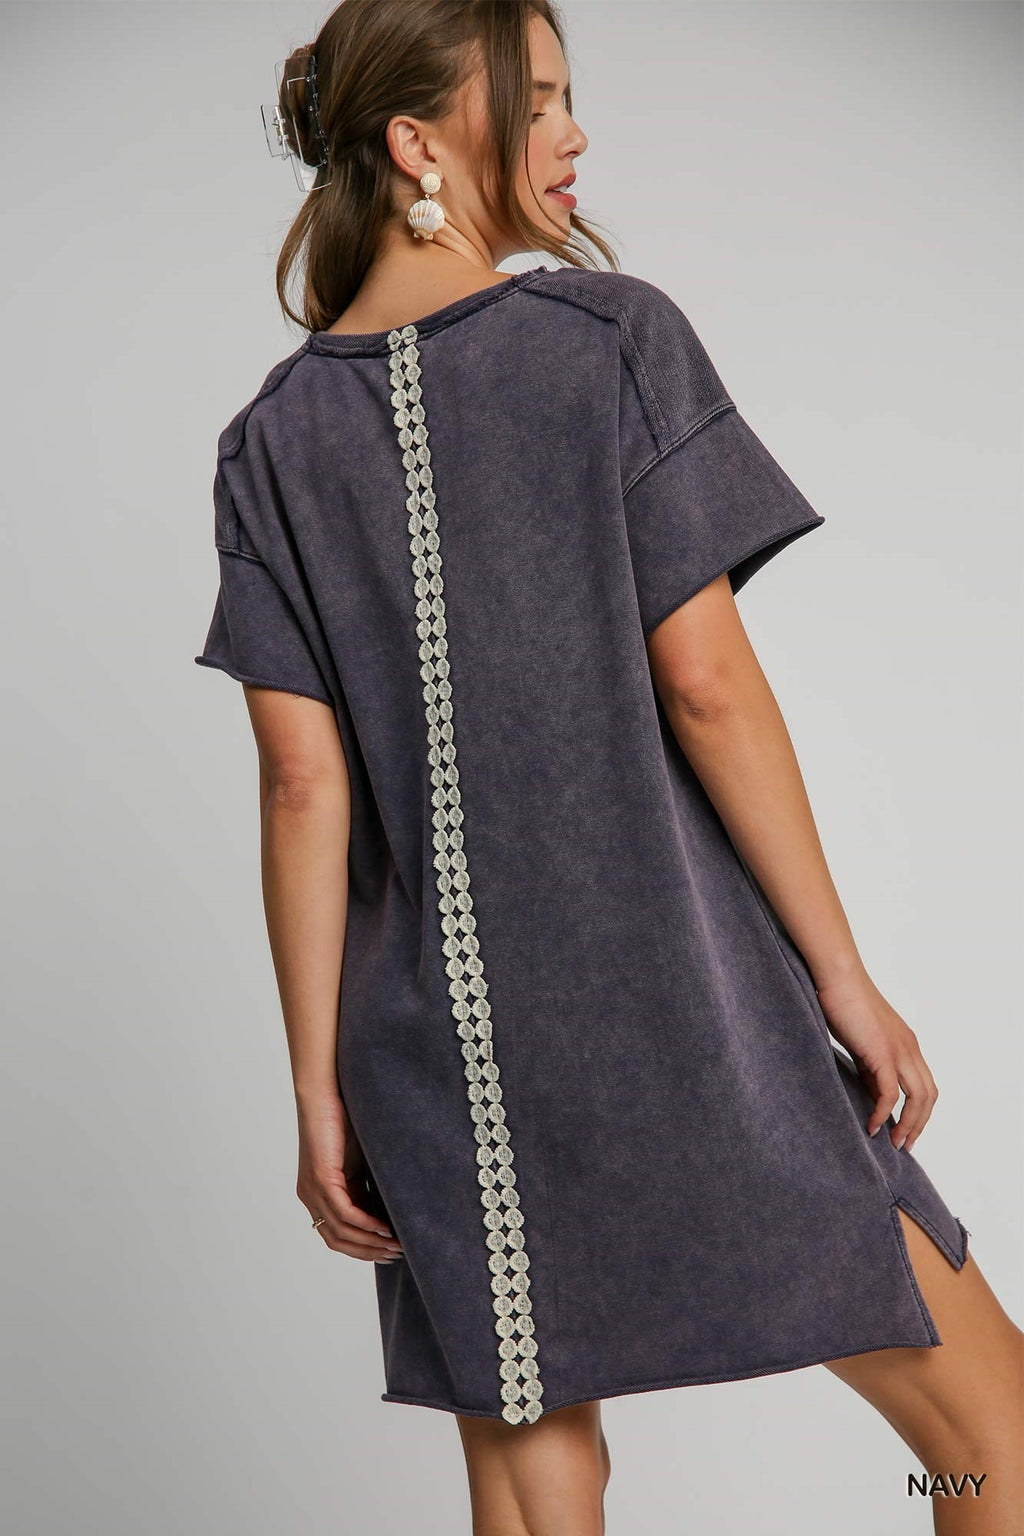 "Wendi" Mineral Washed Dress, 3 colors